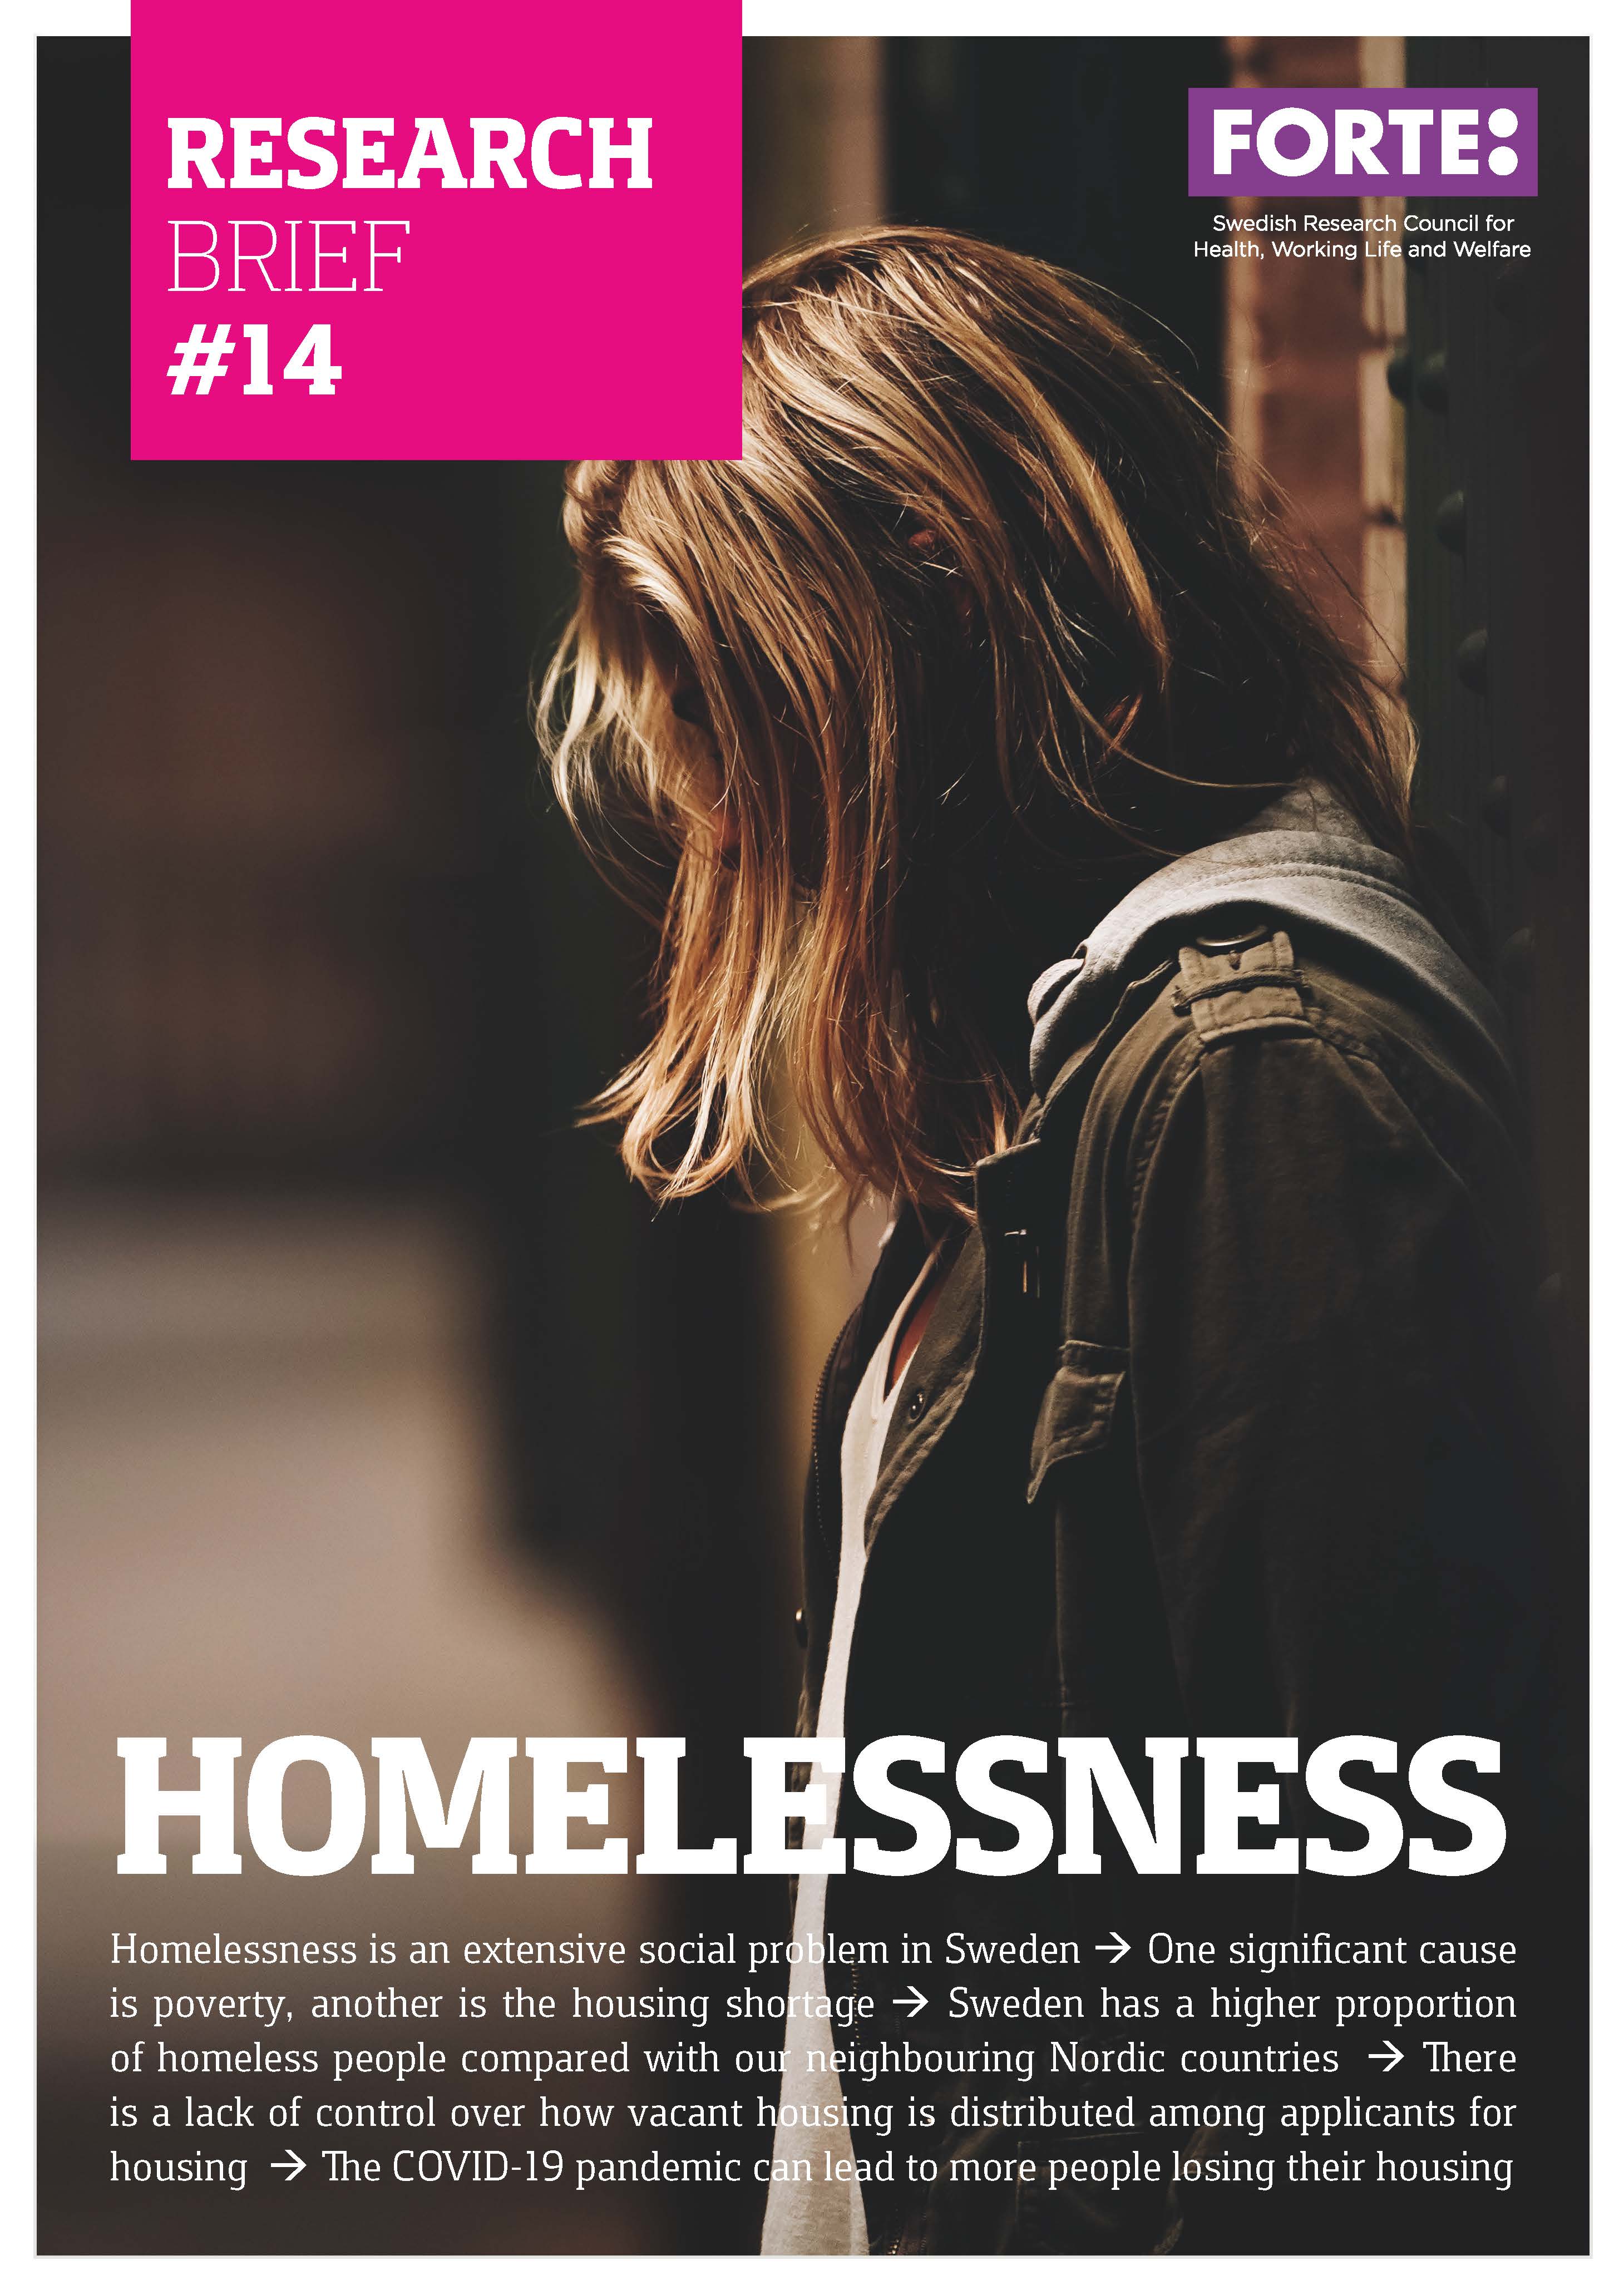 Research brief: Homelessness